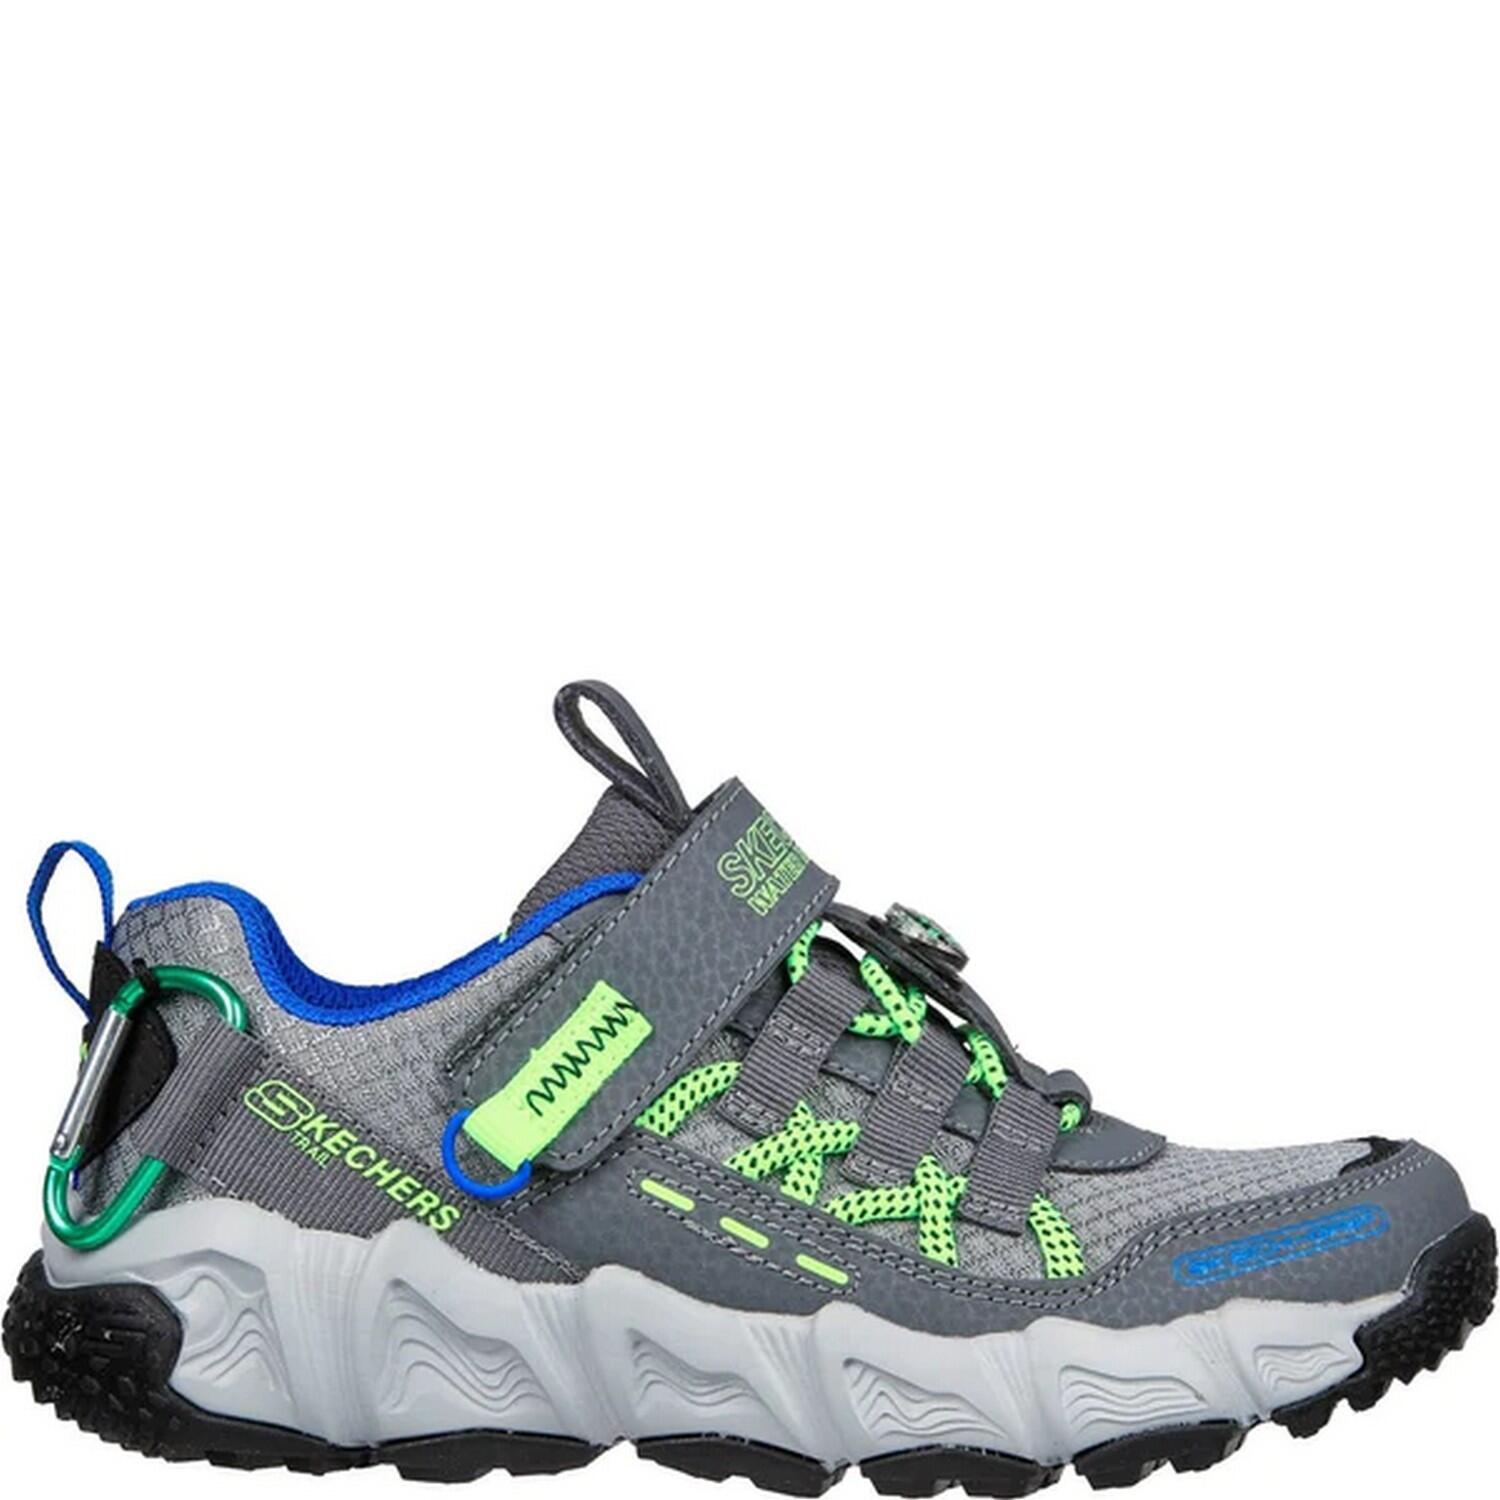 Boys Velocitrek Pro Scout Trainers (Charcoal/Lime) 3/5